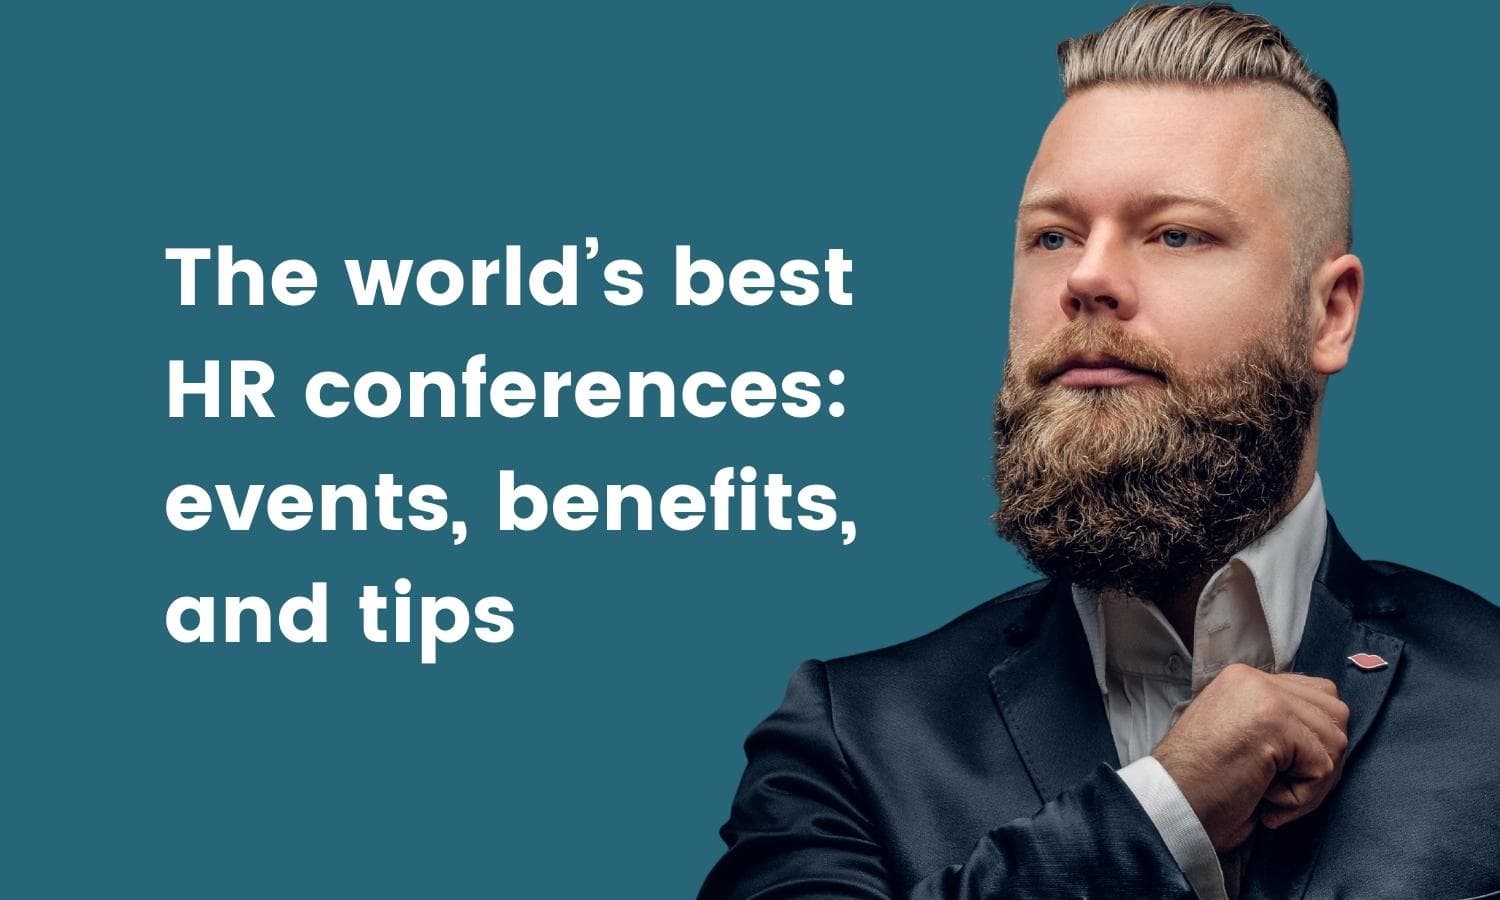 The world’s best HR conferences events, benefits, and tips